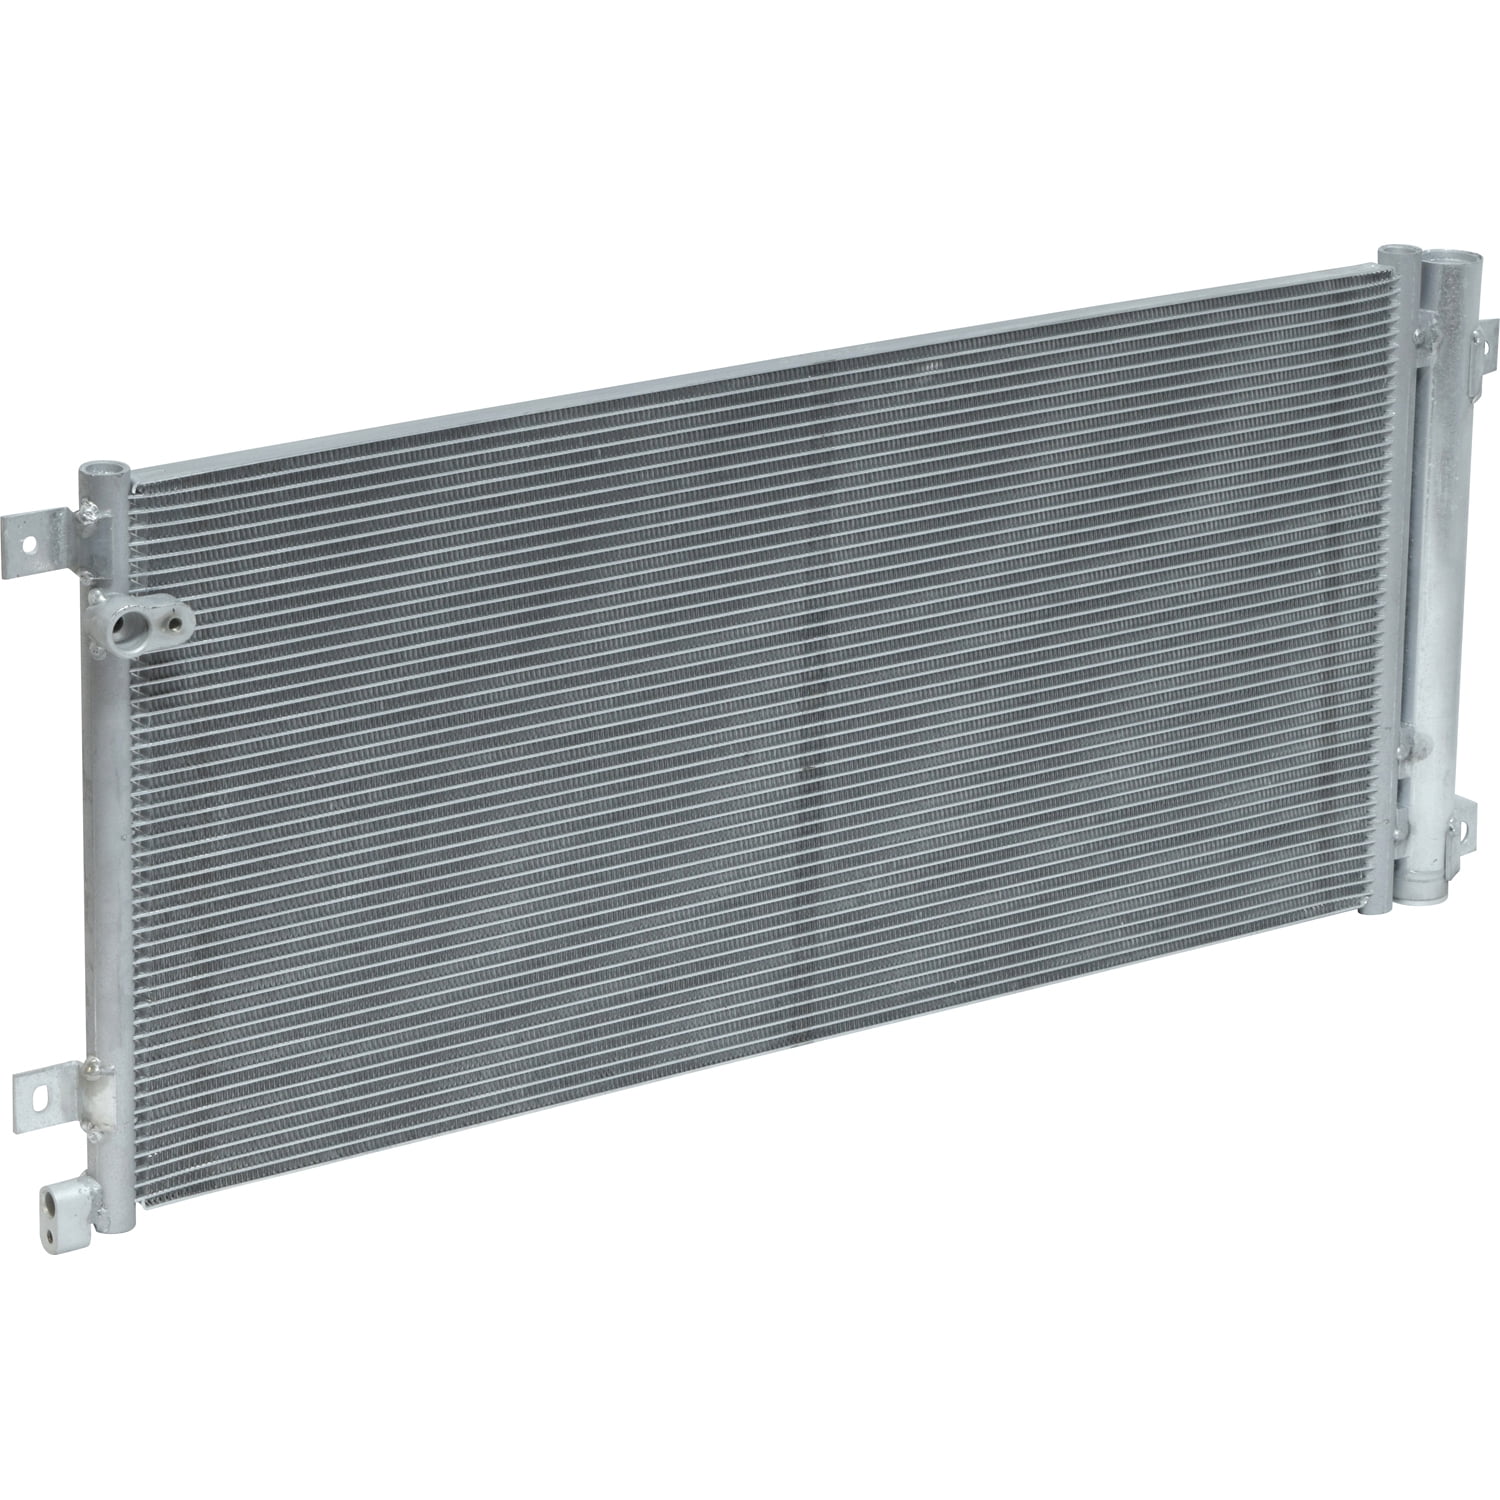 New A/C Condenser for Civic